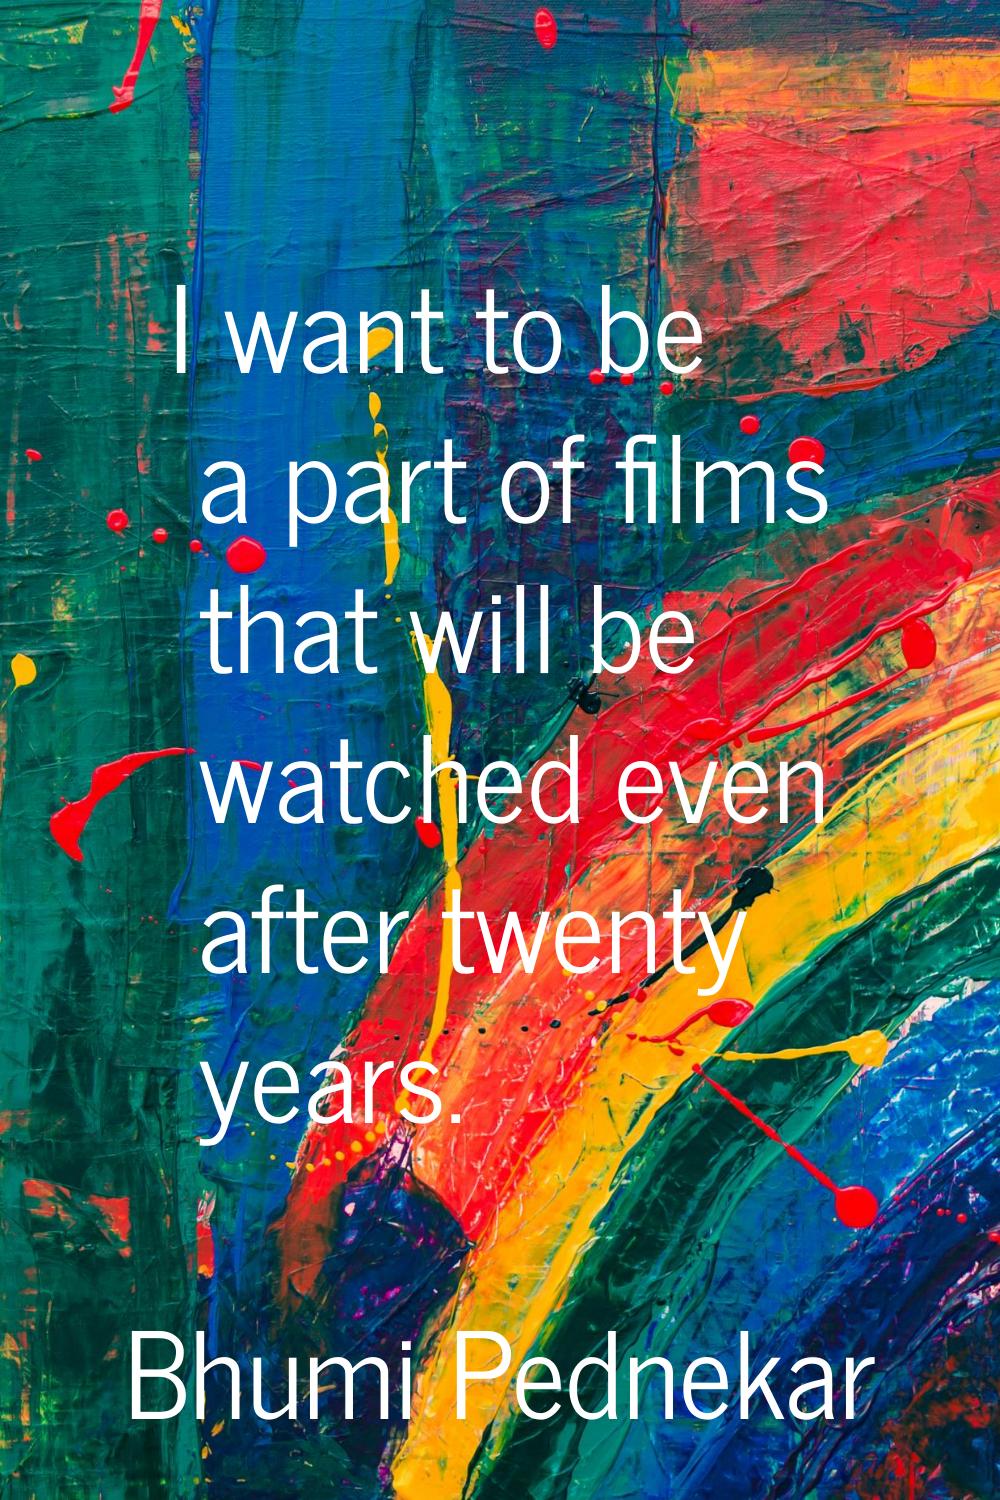 I want to be a part of films that will be watched even after twenty years.